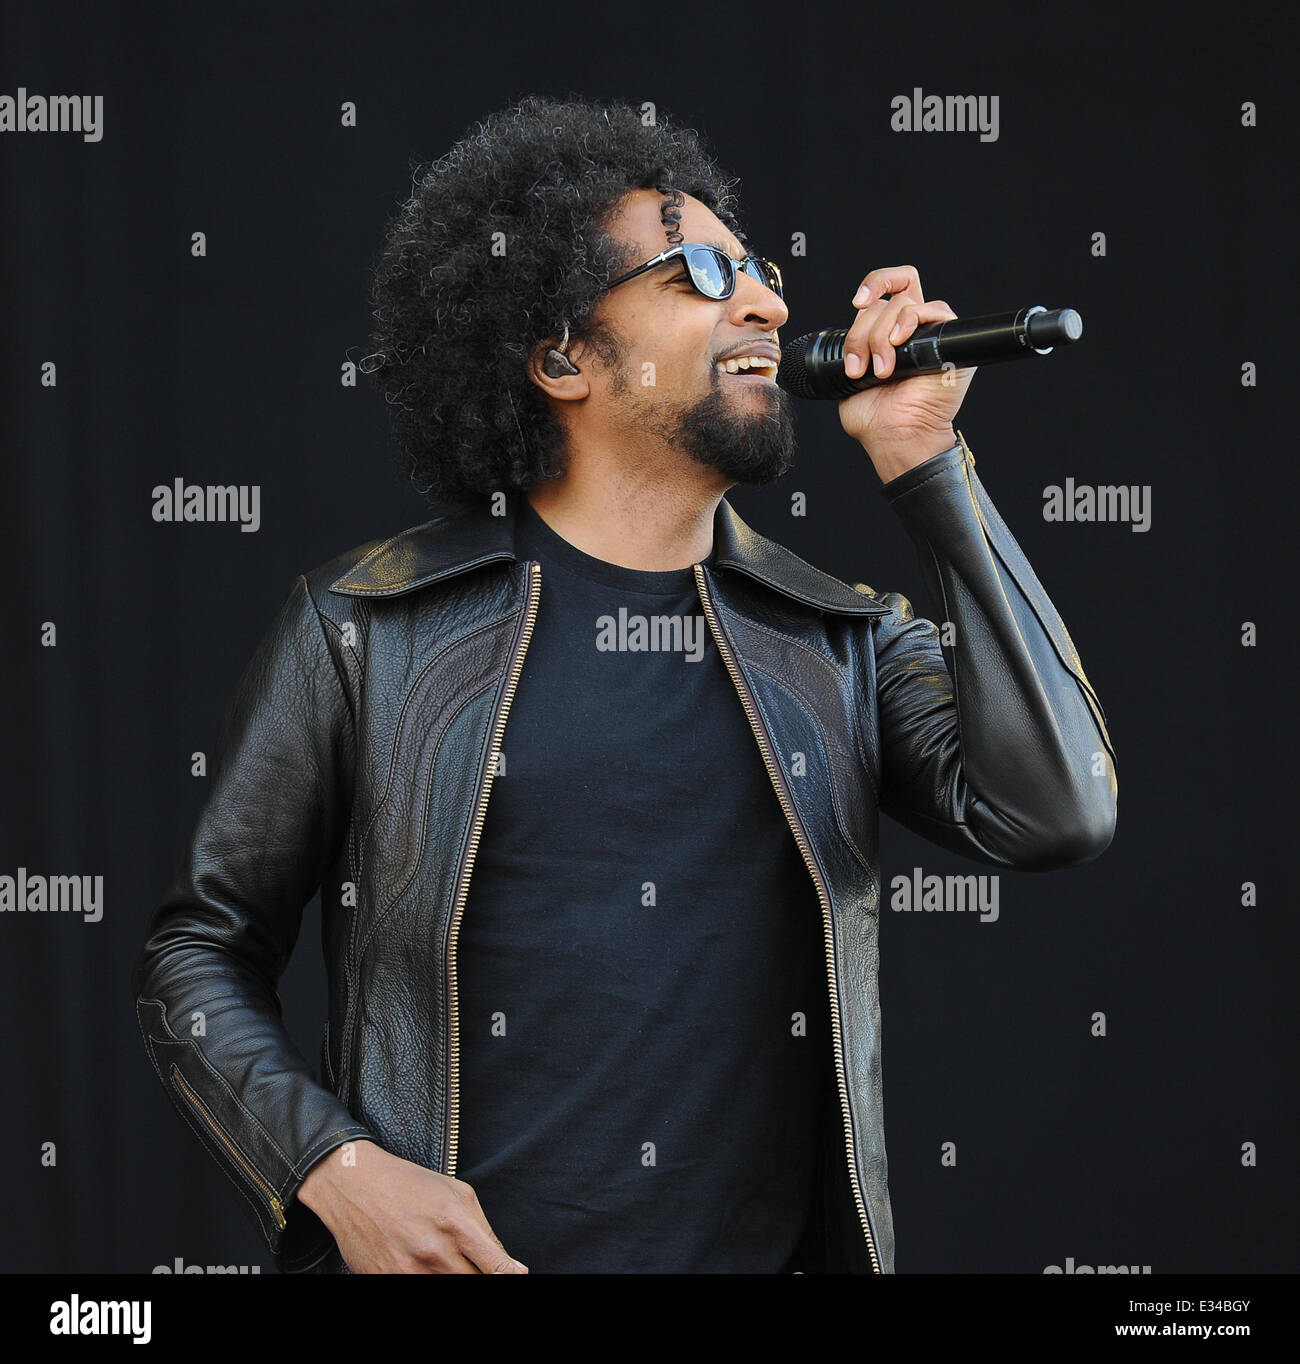 Alice In Chains Perform At Download Festival 2013  Featuring: Members Jerry Cantrell Sean Kinney Mike Inez William DuVall Where: Donnington Park, United Kingdom When: 15 Jun 2013 Stock Photo